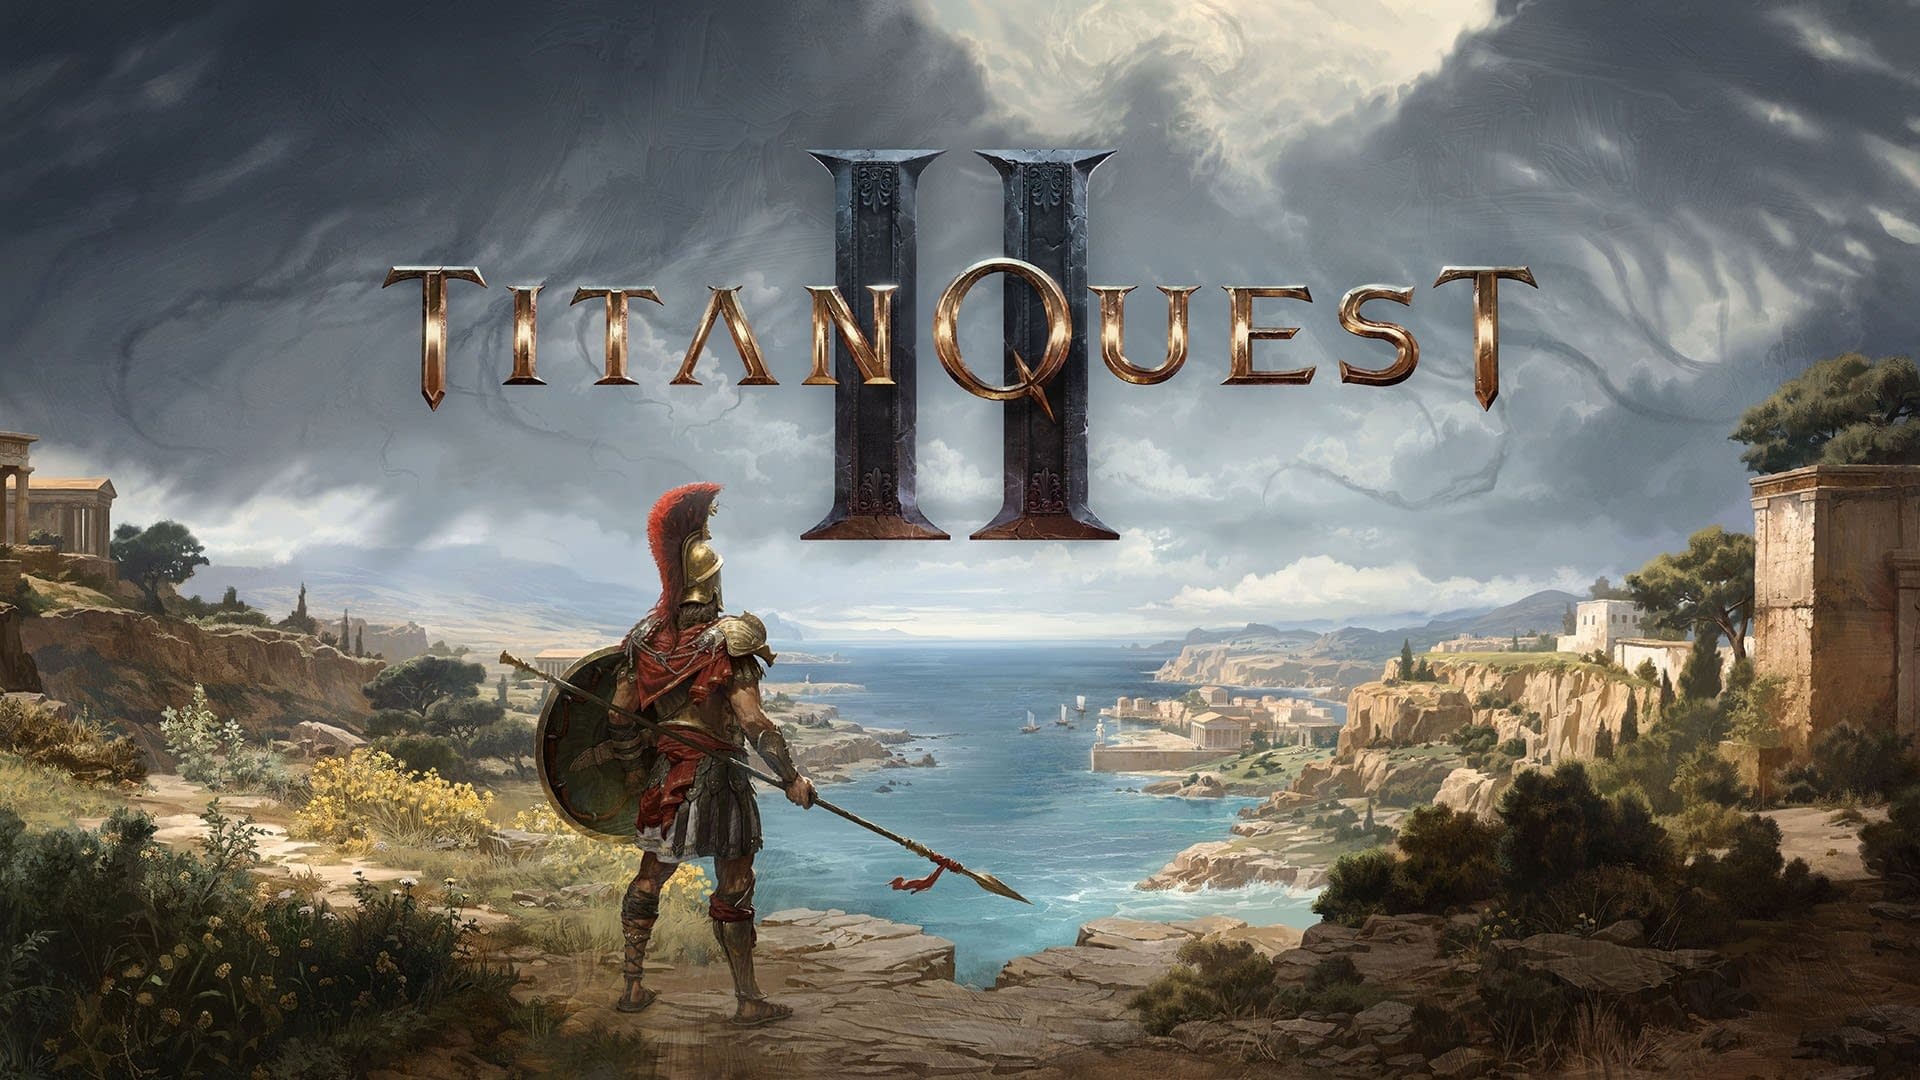 Titan Quest 2 Officially Announced: Here is Fragman